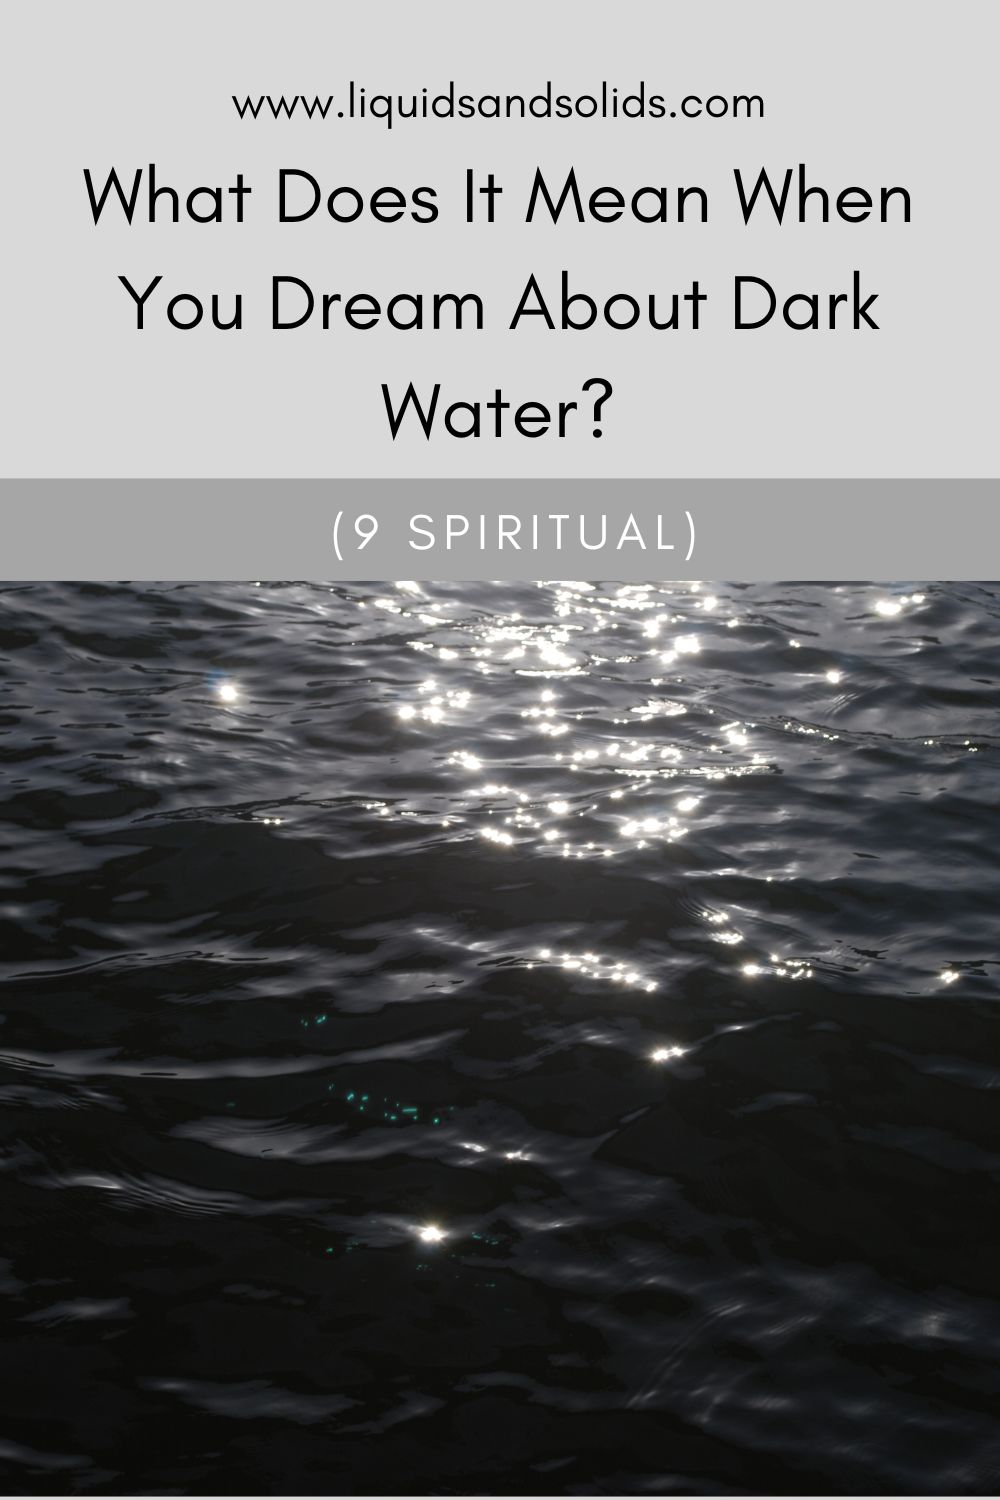 How Can You Make Sense Of Your Dream Of Jumping In Water?